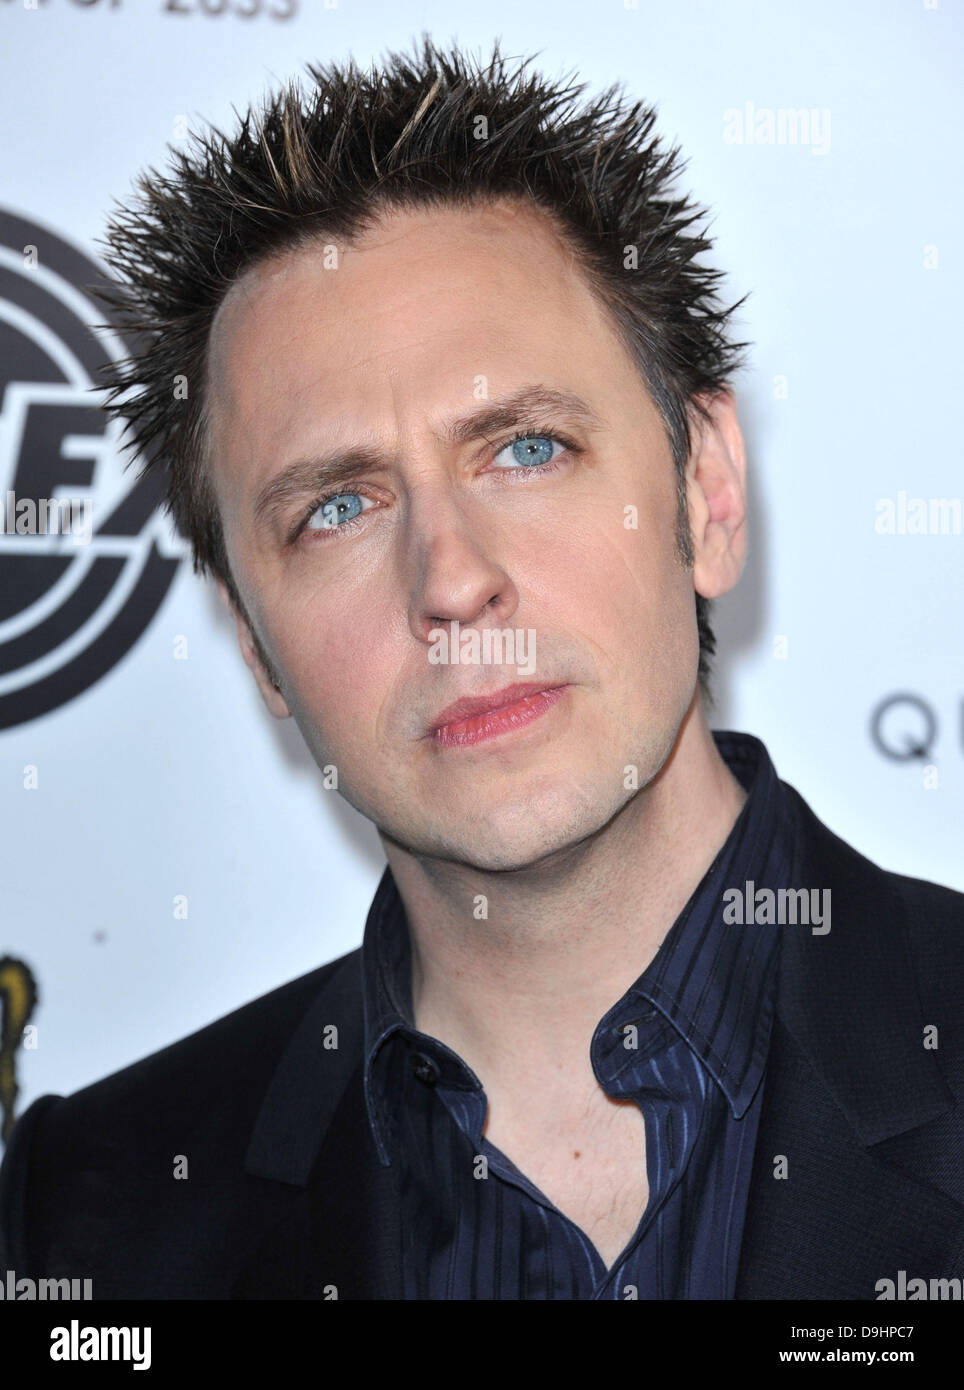 James Gunn Los Angeles premiere of 'Super' held at The Egyptian Theatre - Arrivals Los Angeles, California - 21.03.11 Stock Photo